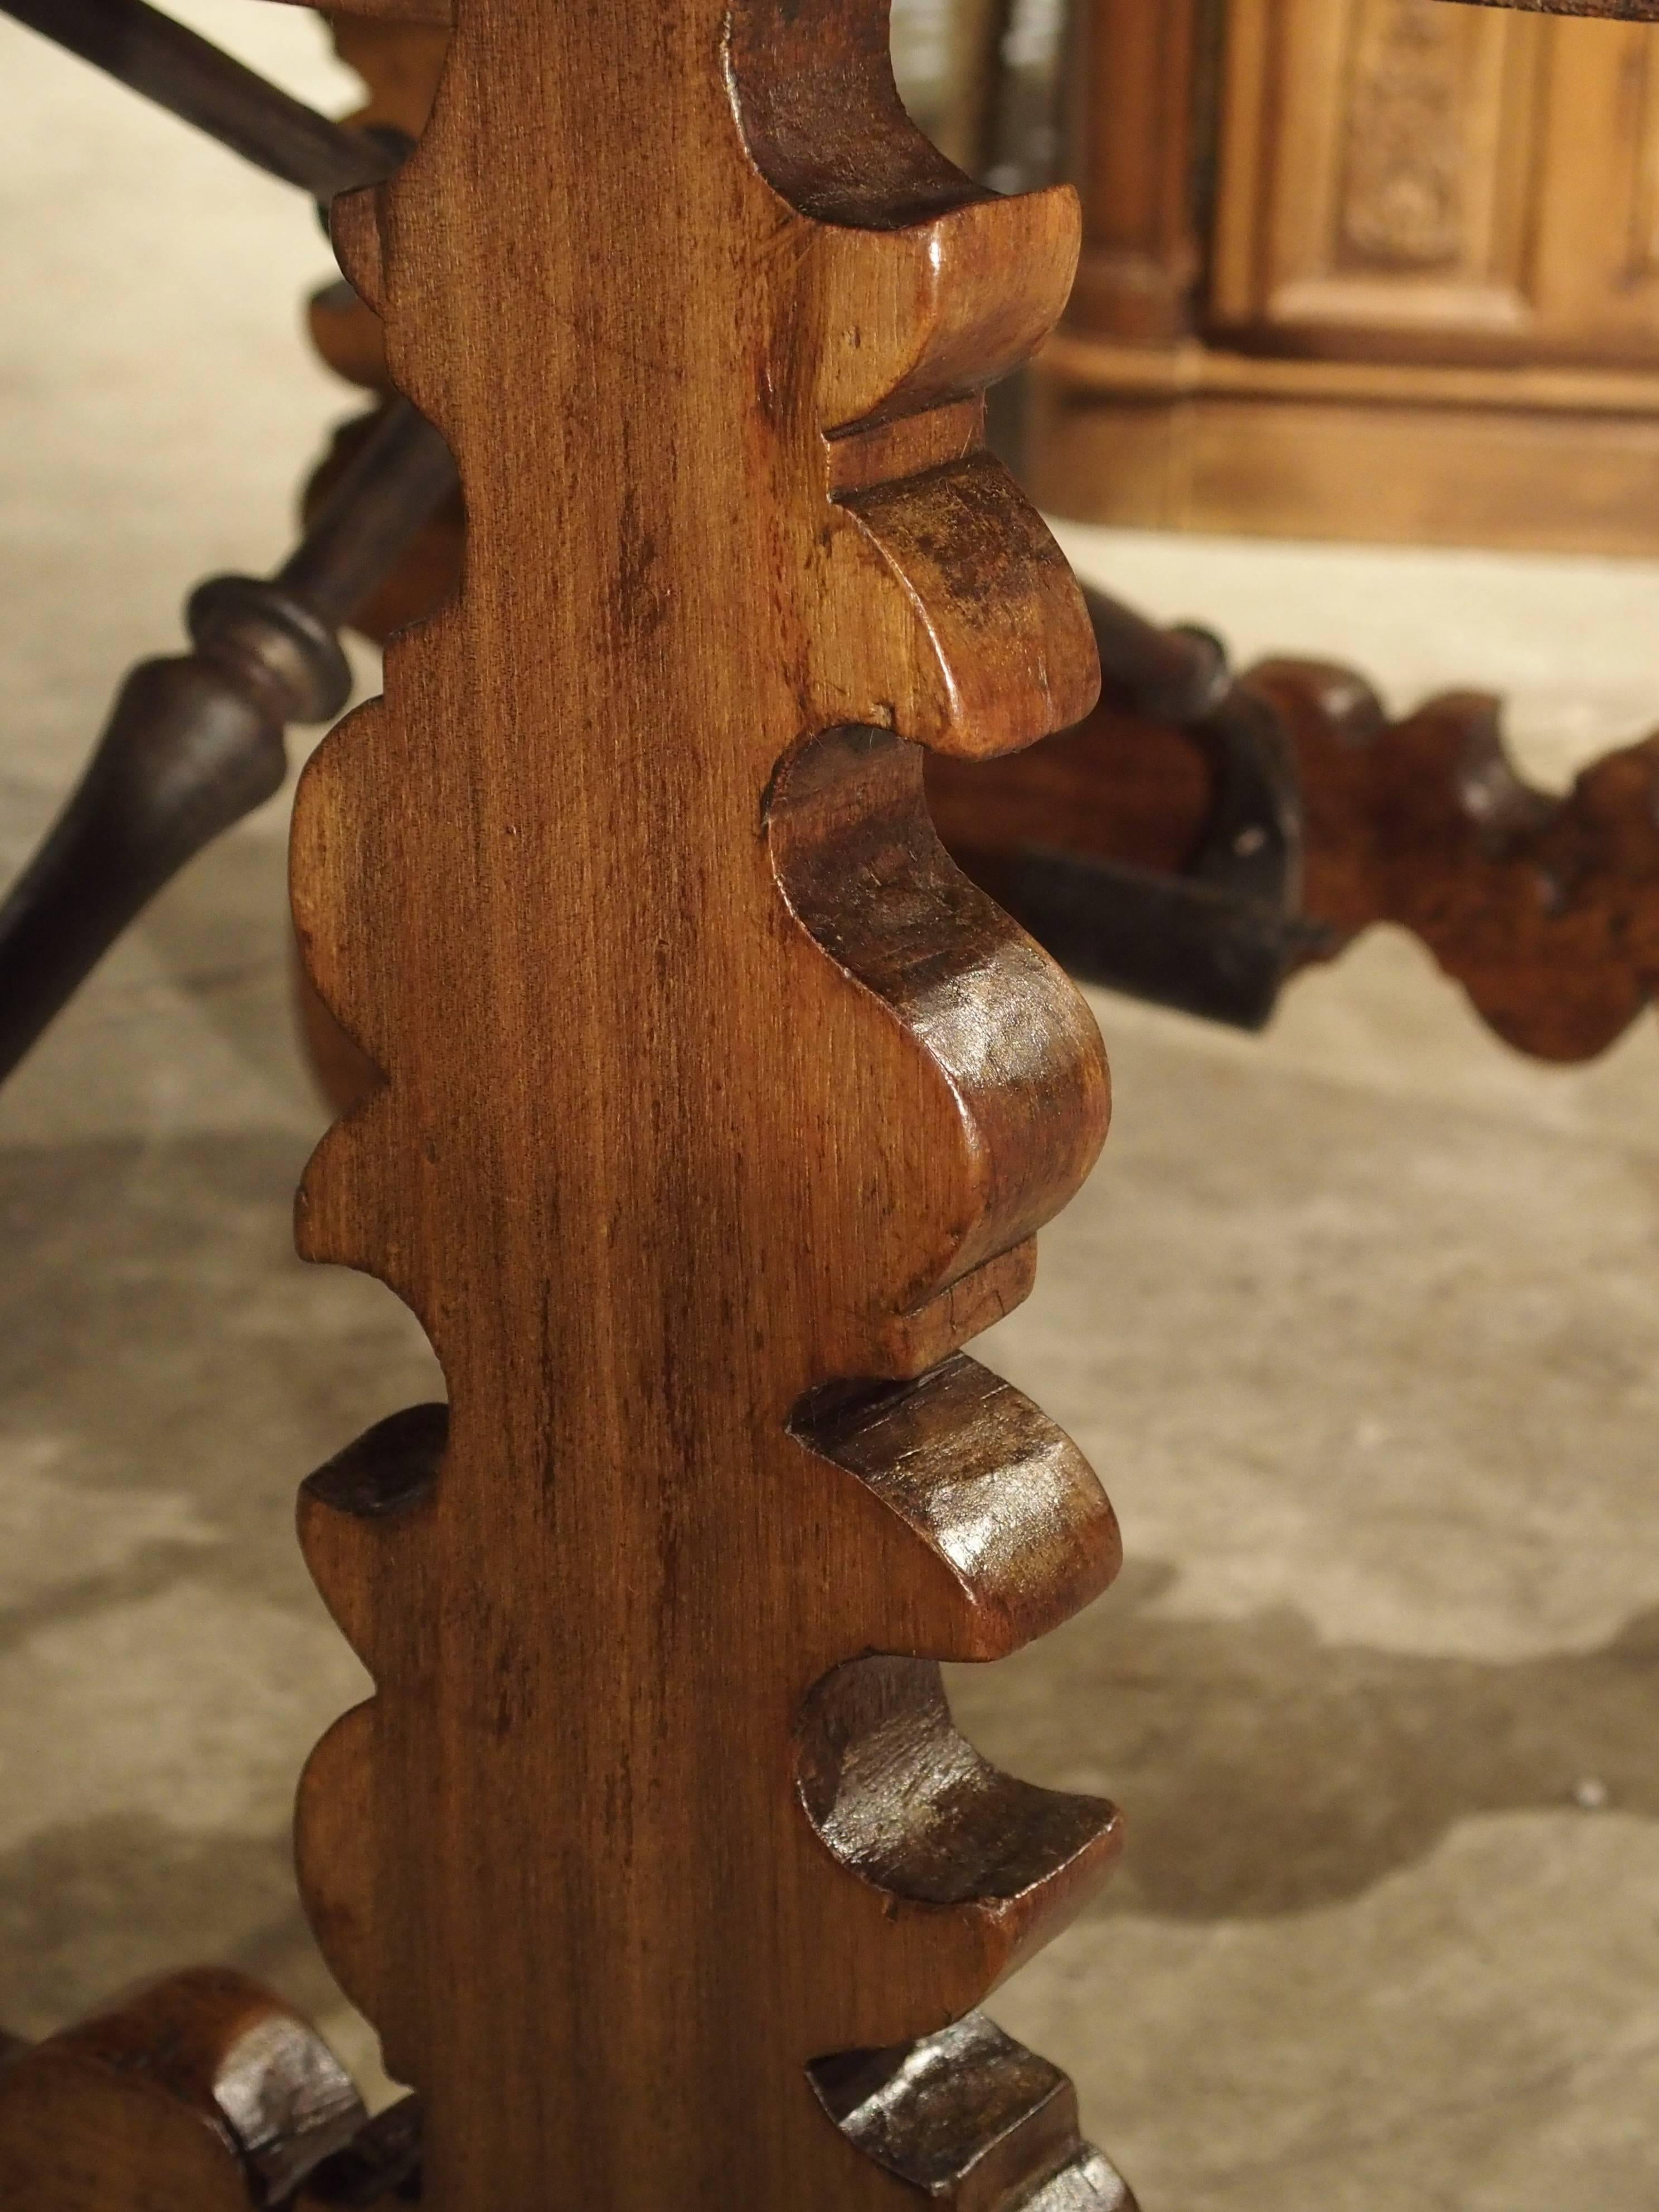 This small, hand-carved table with crossed iron stretchers is from Northern Spain and made from walnut wood. Its size is perfect for so many smaller areas of the home. It has carved ornamentation on the front drawer and the outside of the turned